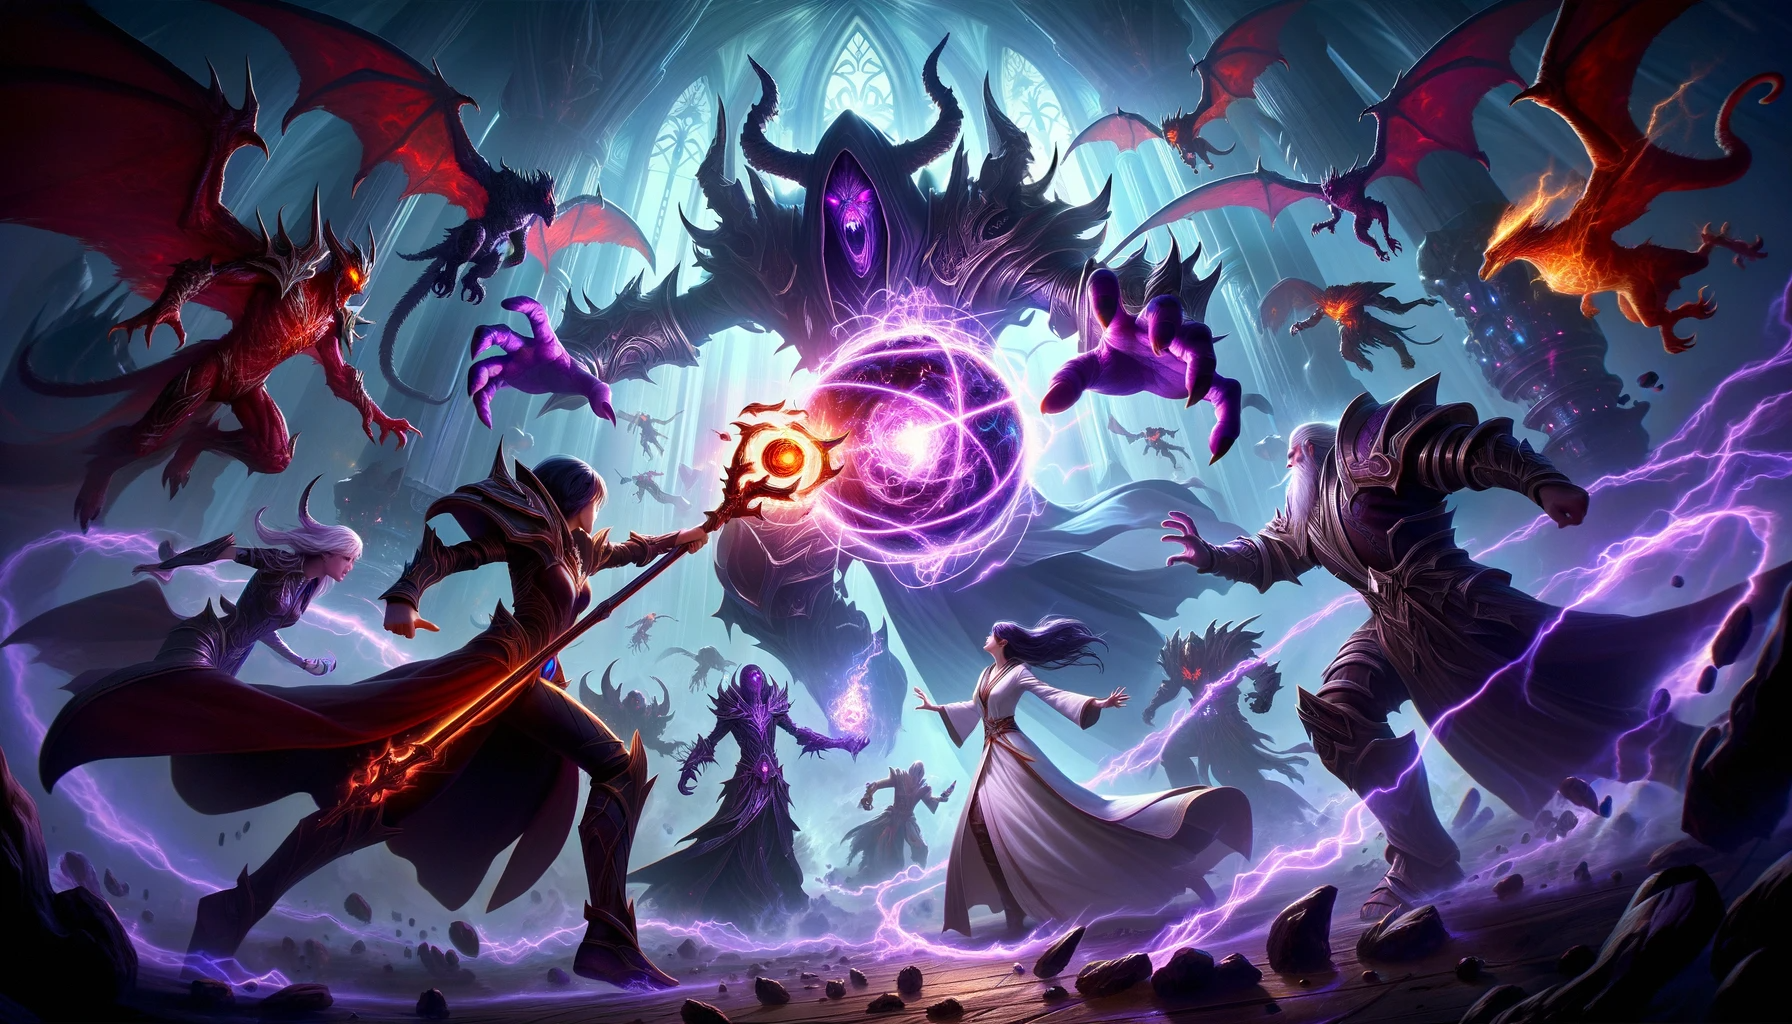 Inside the Shadowed Crucible, the Avengers face off against Sarkareth and his dark forces. Anala, with her staff, is disrupting The Sundered Flame's energy, while Teldra and Kirrin cast their spells in unison.